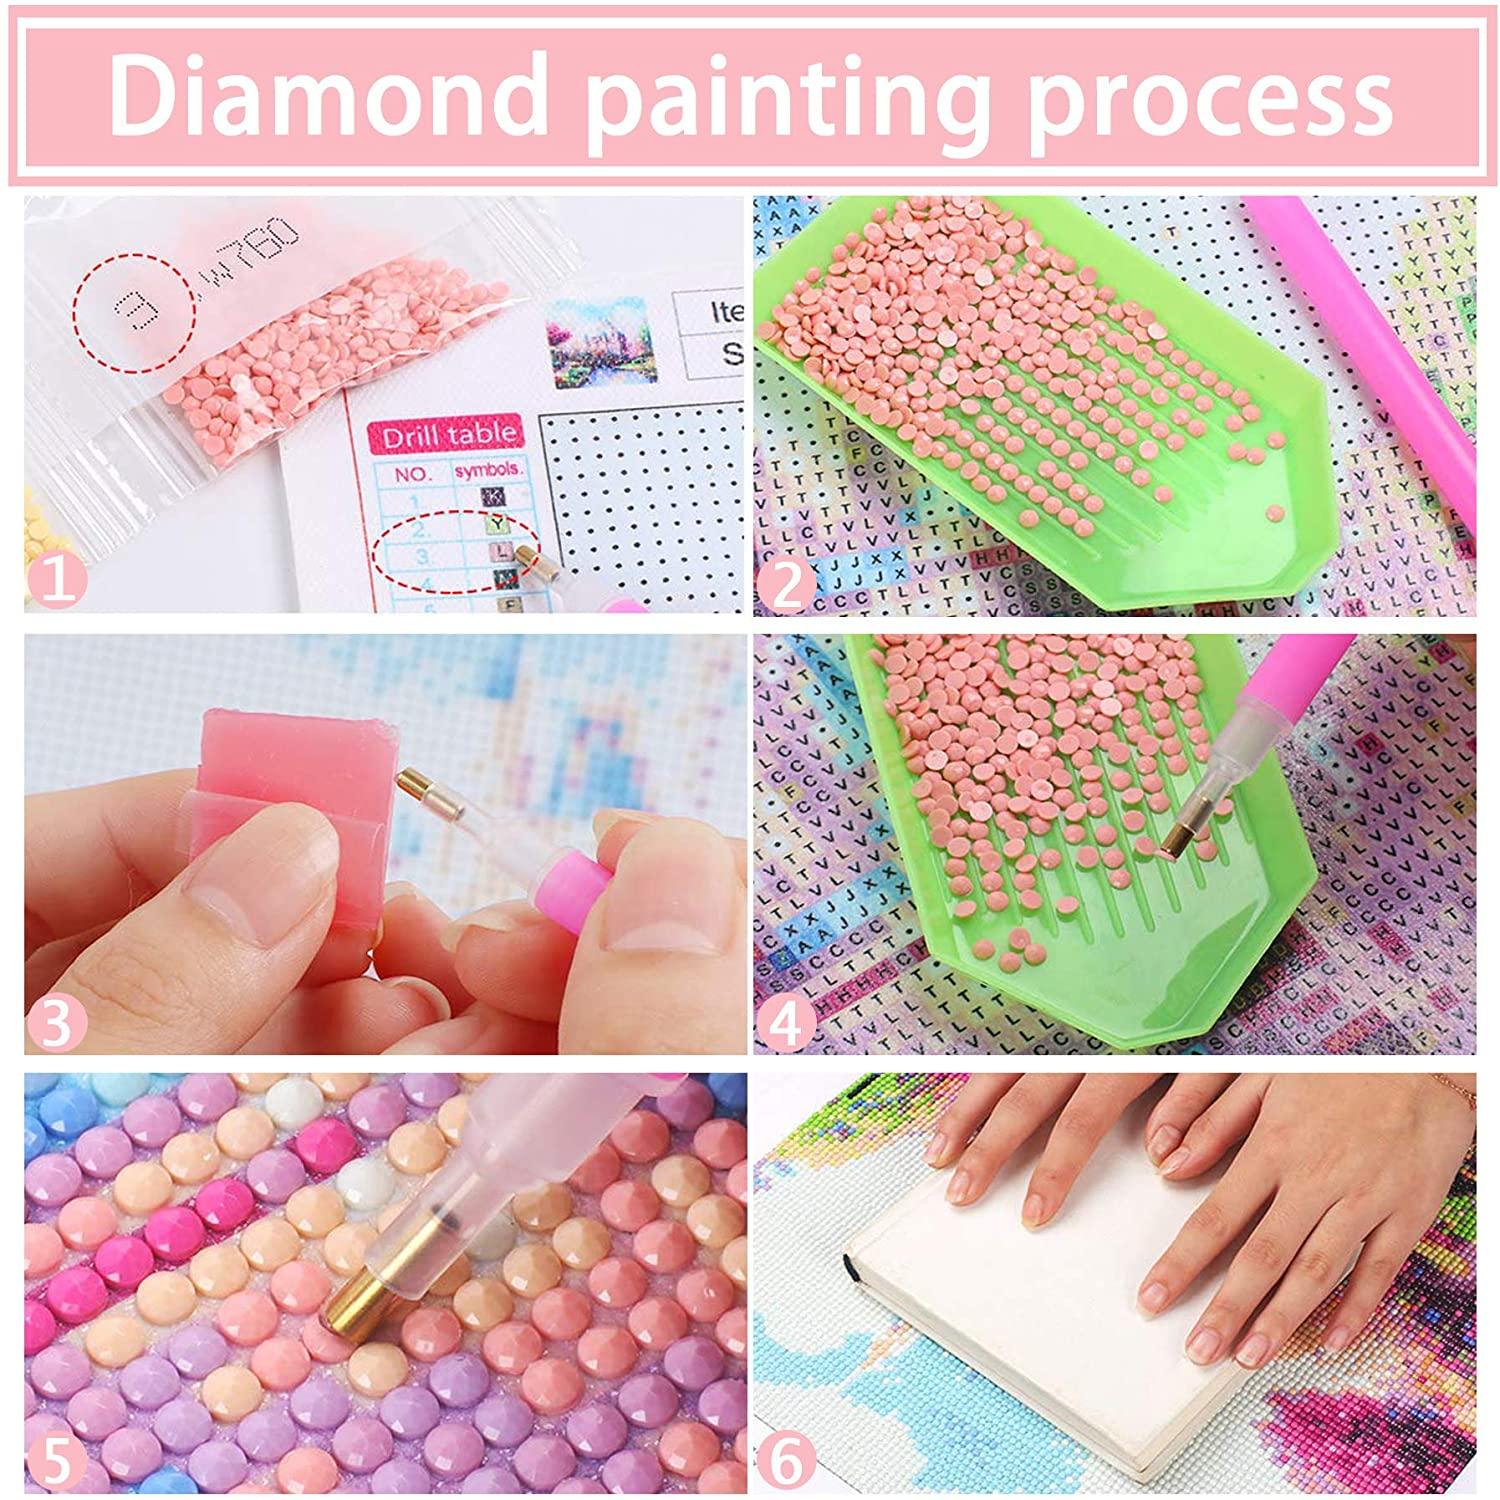 Bimkole 5D Diamond Painting Letters Full Drill by Number Kits DIY Rhinestone Pasted 12x16inch